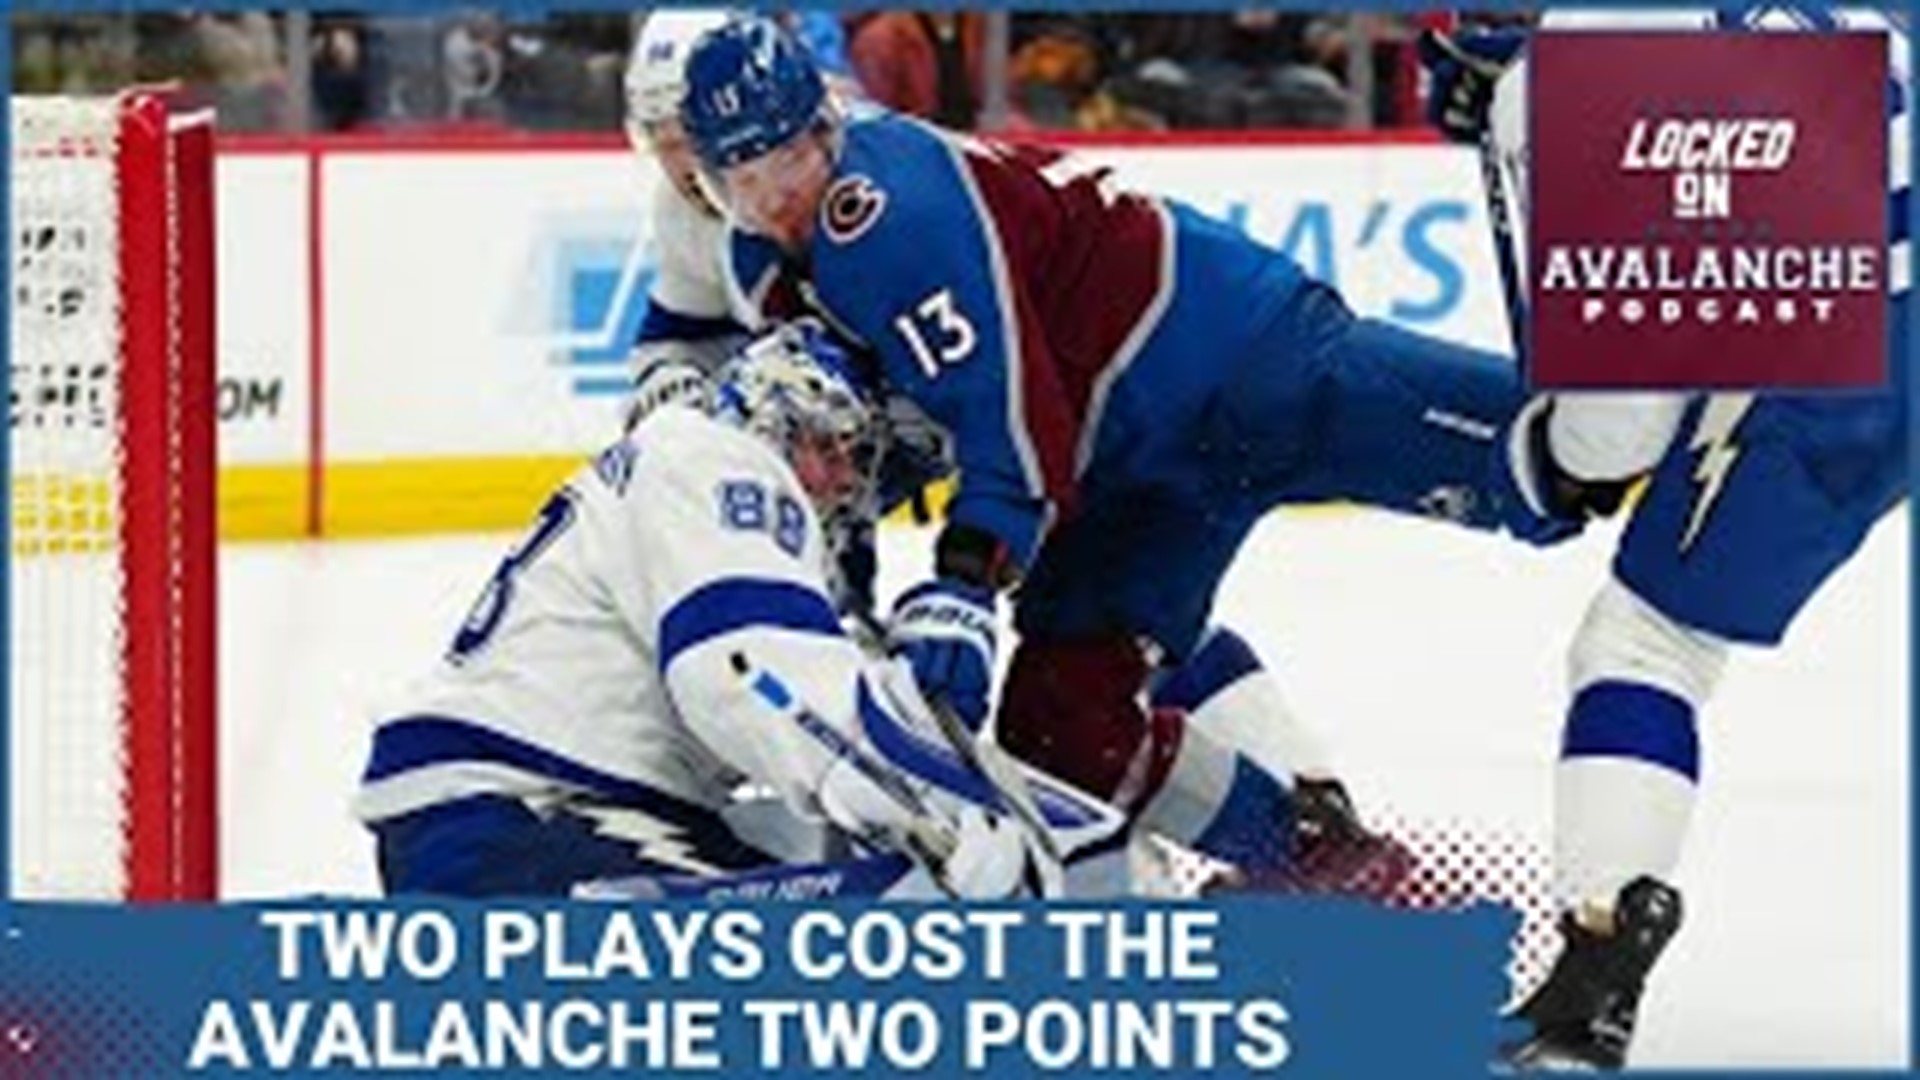 The Avalanche needed to play better than the 5-0 loss to the Lightning they suffered last week in Tampa. And for the most part, they did just that.